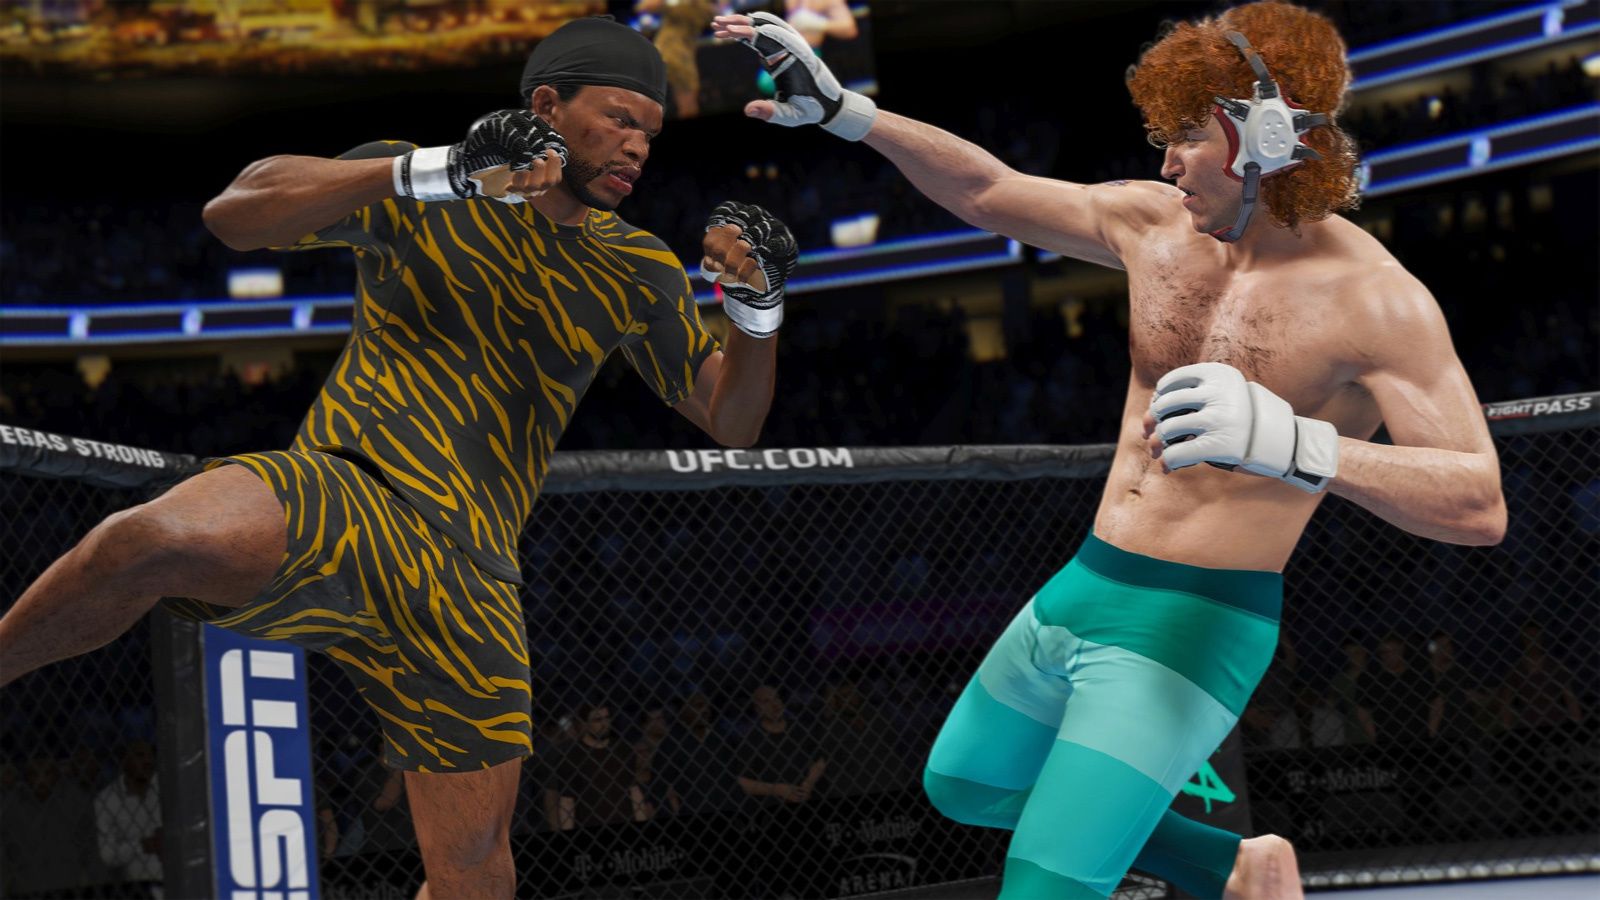 EA's 'UFC 4' focuses on your fighter's backstory